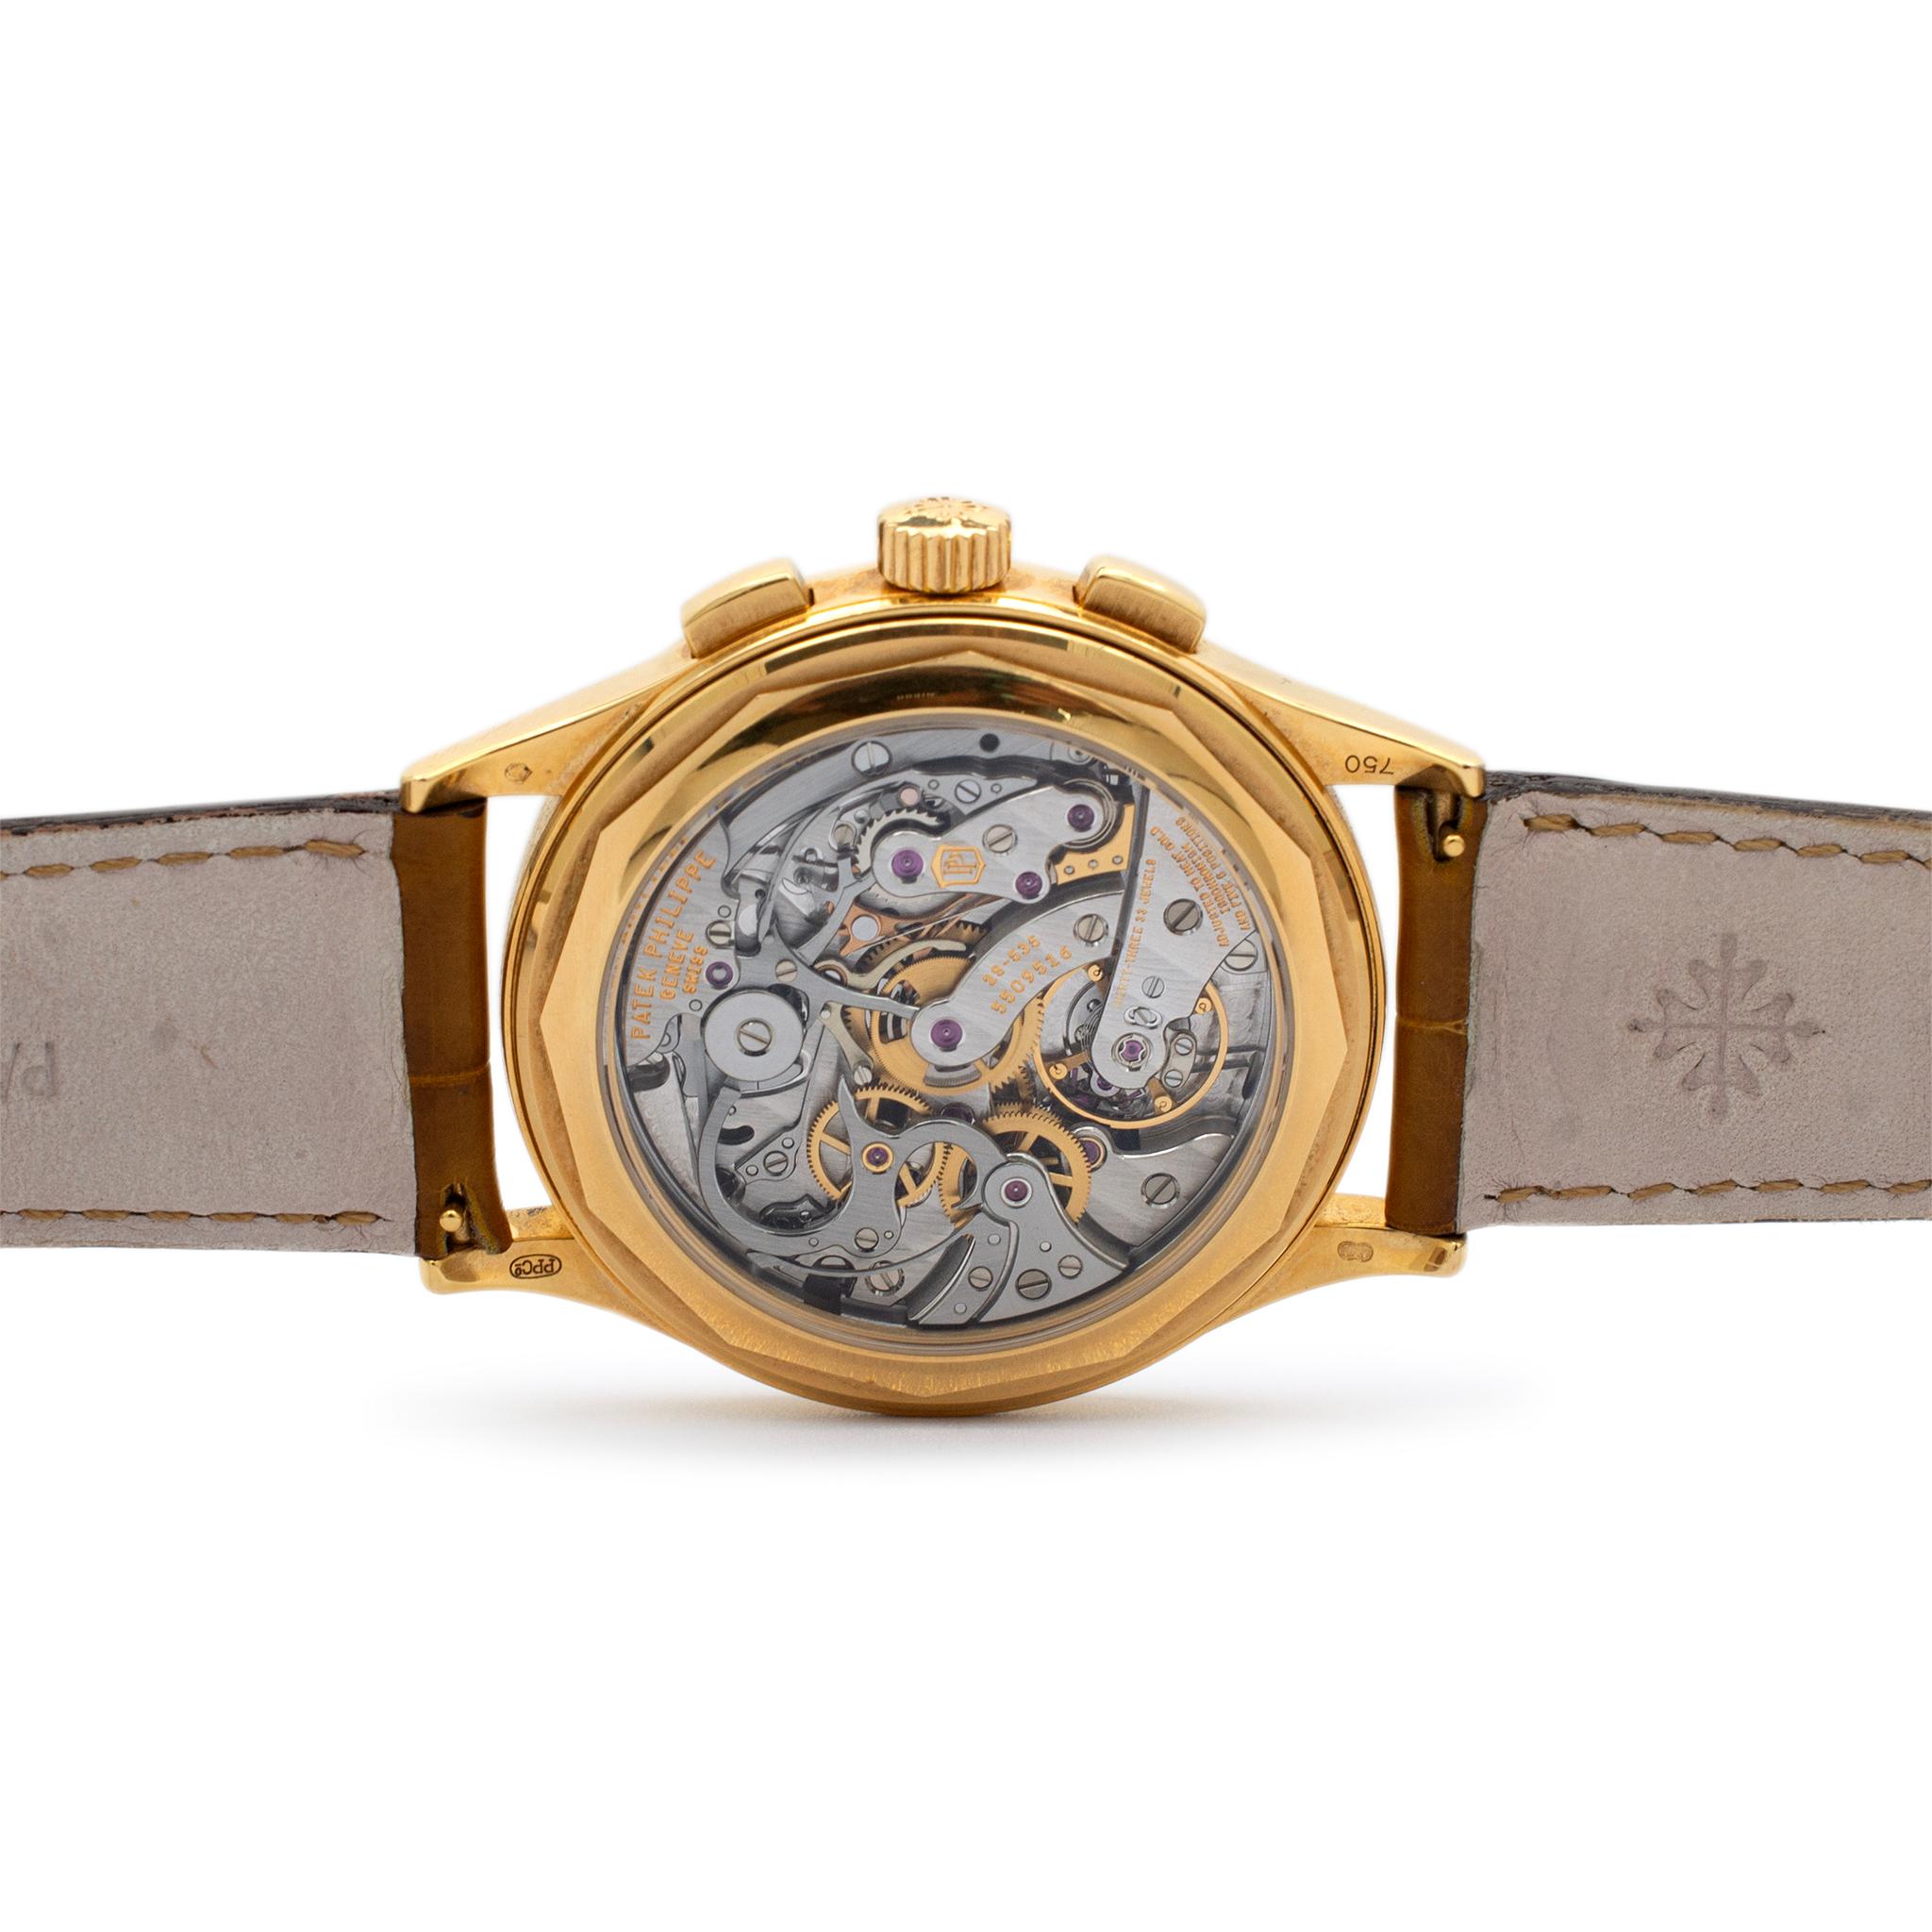 Patek Philippe Complications Chronograph 5170J-001 18K Yellow Gold Men's Watch For Sale 2